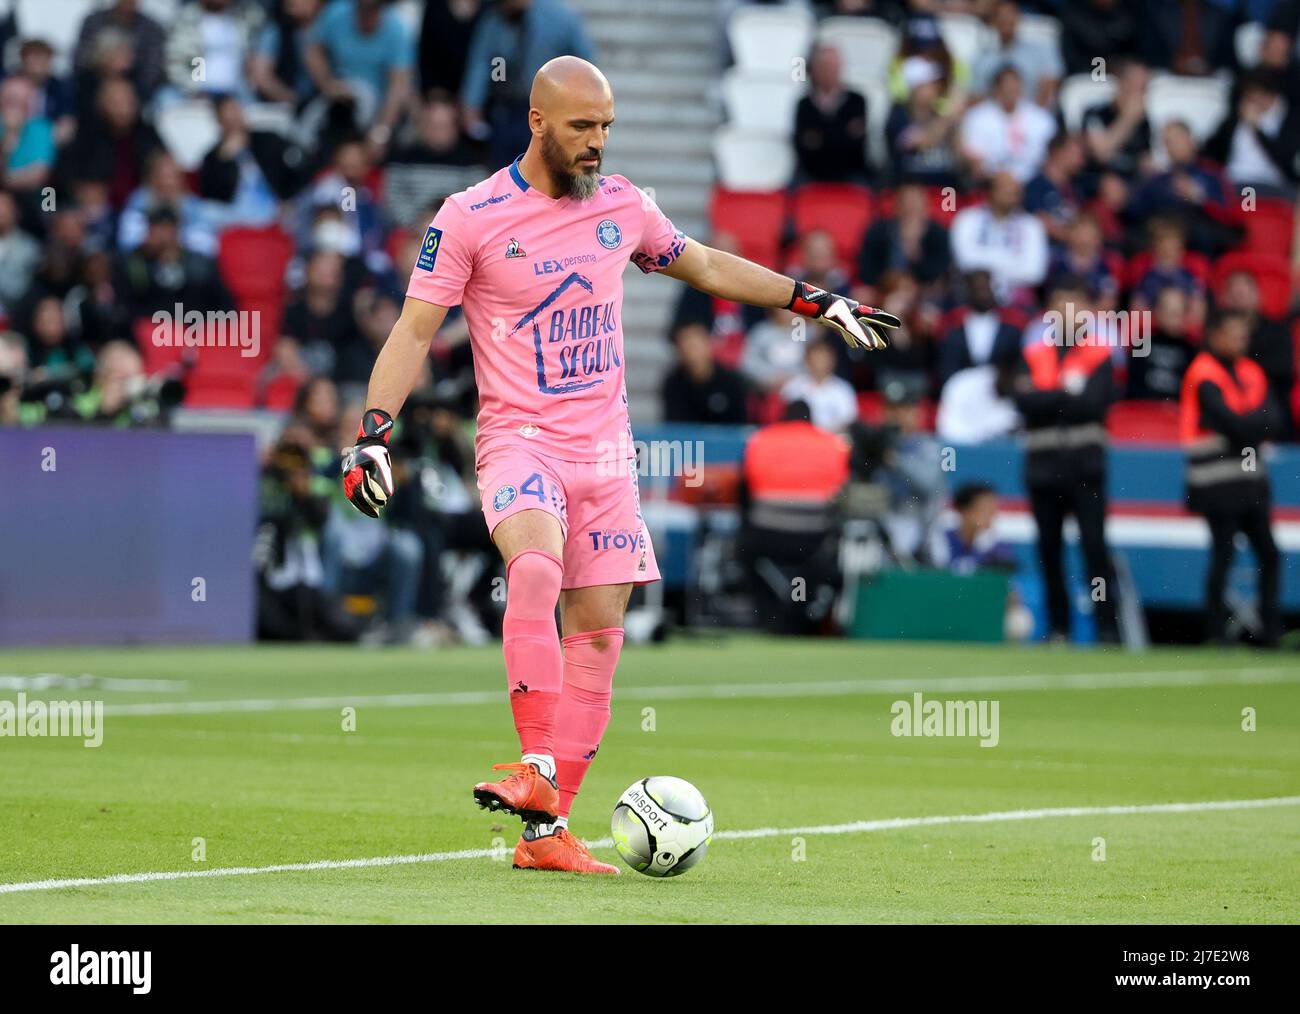 Paris, France, 08/05/2022, Goalkeeper of Troyes Jessy Moulin during the  French championship Ligue 1 football match between Paris Saint-Germain and  ESTAC Troyes on May 8, 2022 at Parc des Princes stadium in